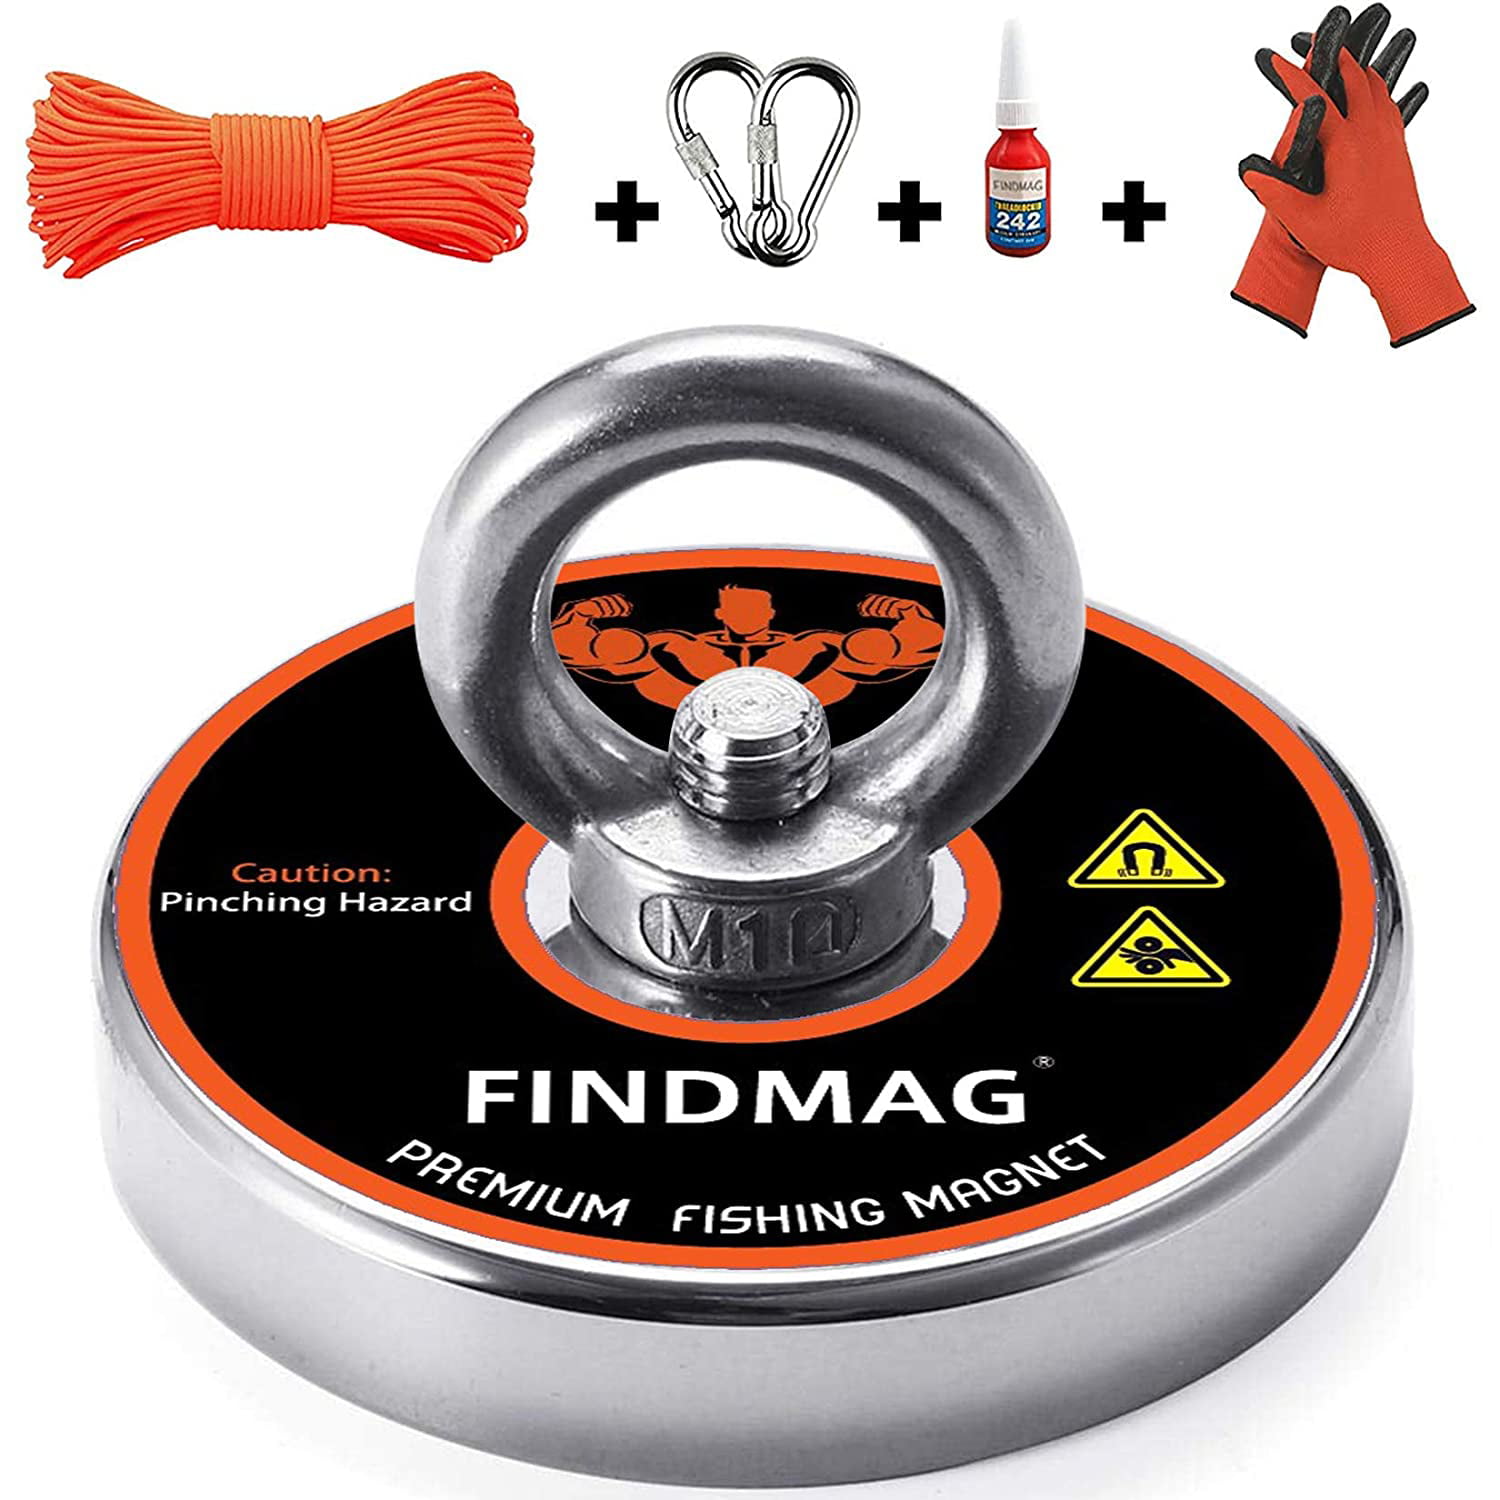 Magnet Fishing Kit with Case Fishing Magnets 600 LBS Pulling Force Super Strong